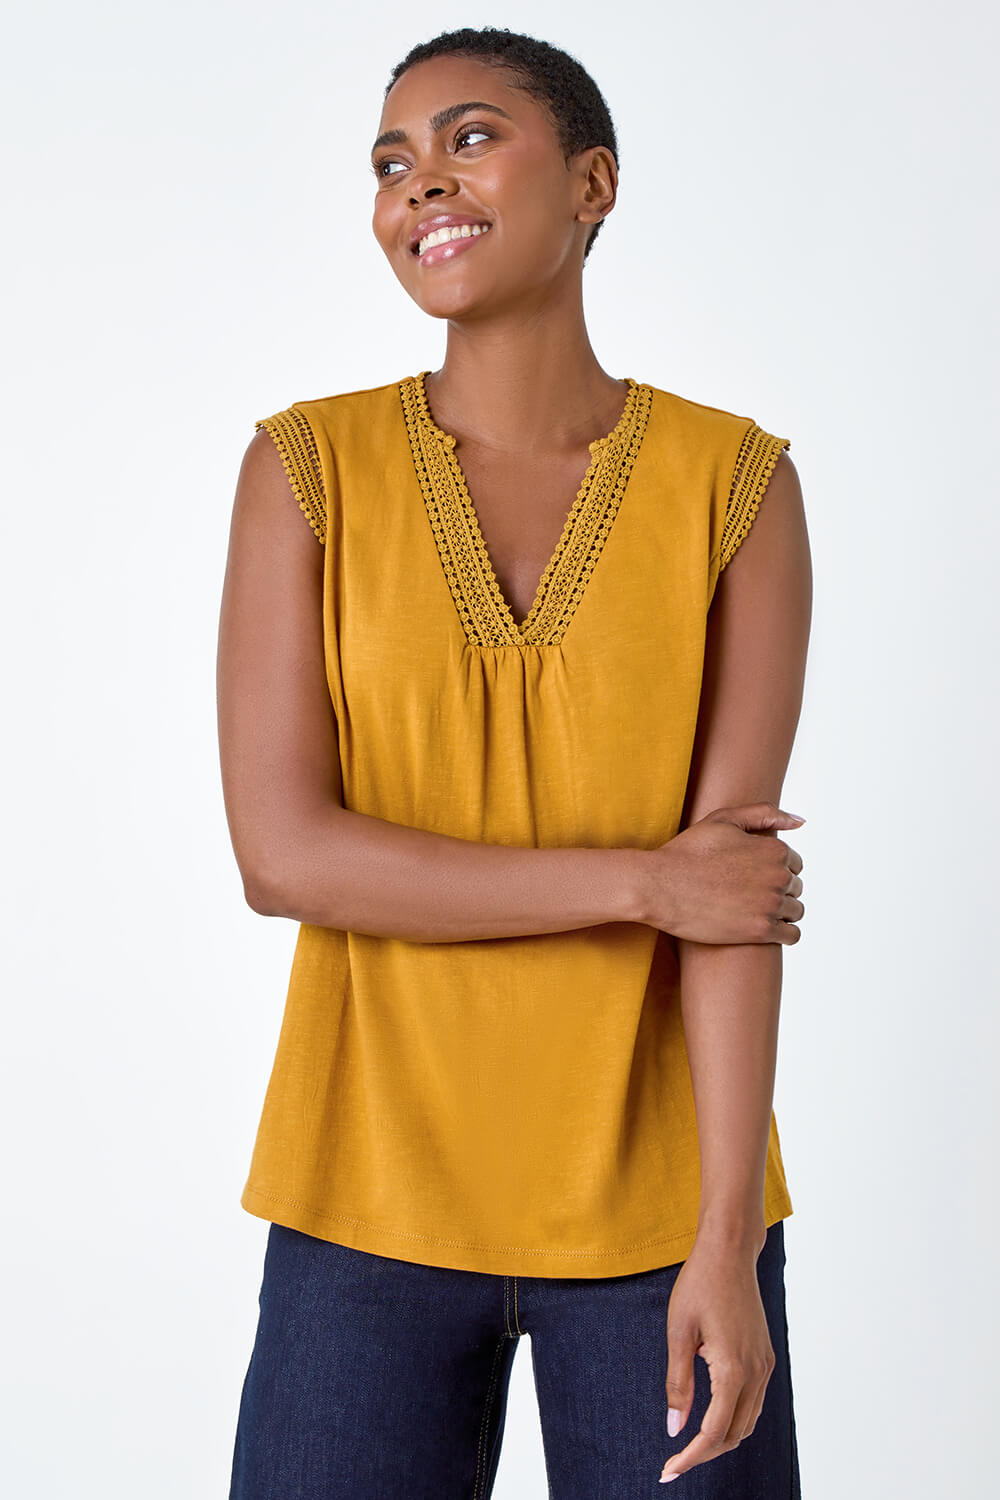 Ochre Sleeveless Lace Trim Cotton Top, Image 4 of 5